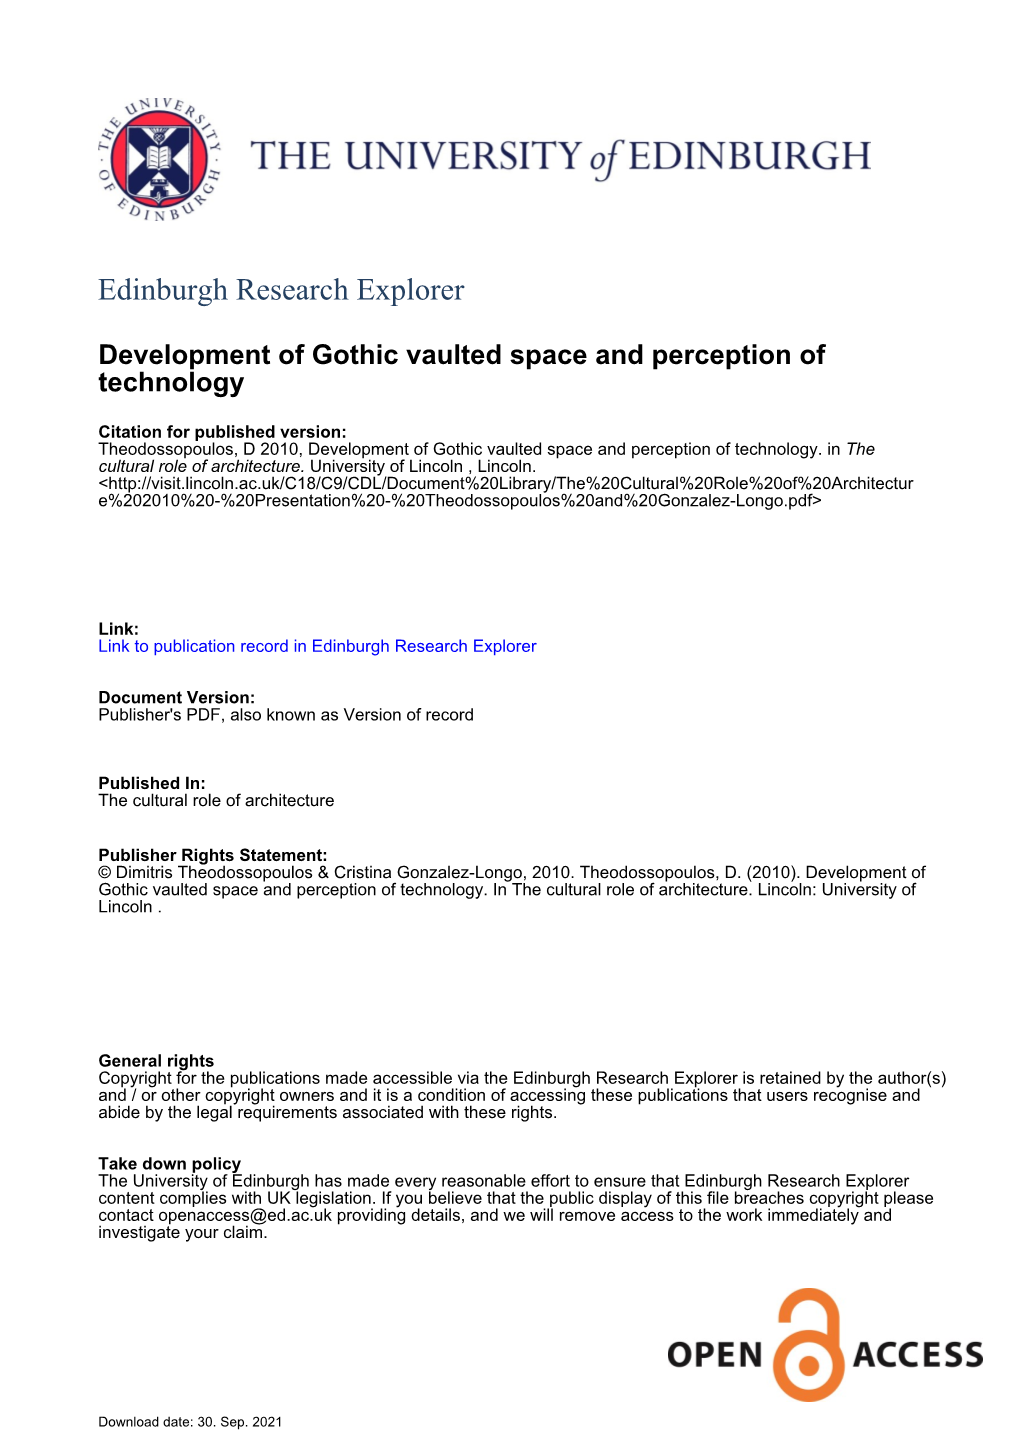 Development of Gothic Vaulted Space and Perception of Technology